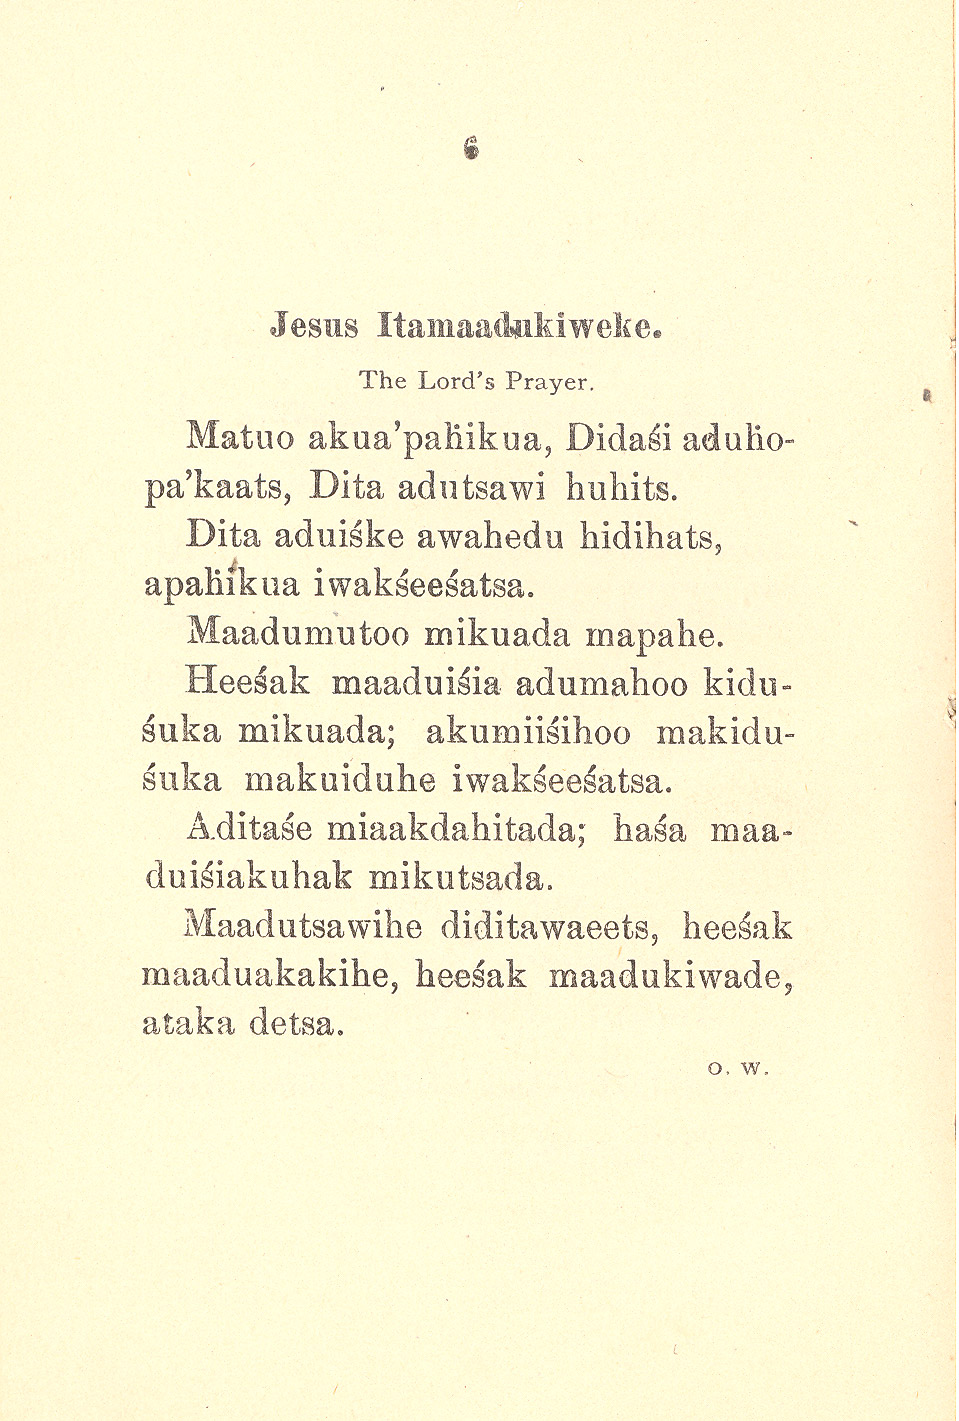 Hidatsa Hymns. The Reverend Hall and members of his staff collaborated with interpreters to translate Christian Hymns and prayers into Hidatsa (Gros Ventre) language. As the missionaries learned the language and translated the religious hymns from English into Hidatsa, they also preserved the language of the Hidatsas.